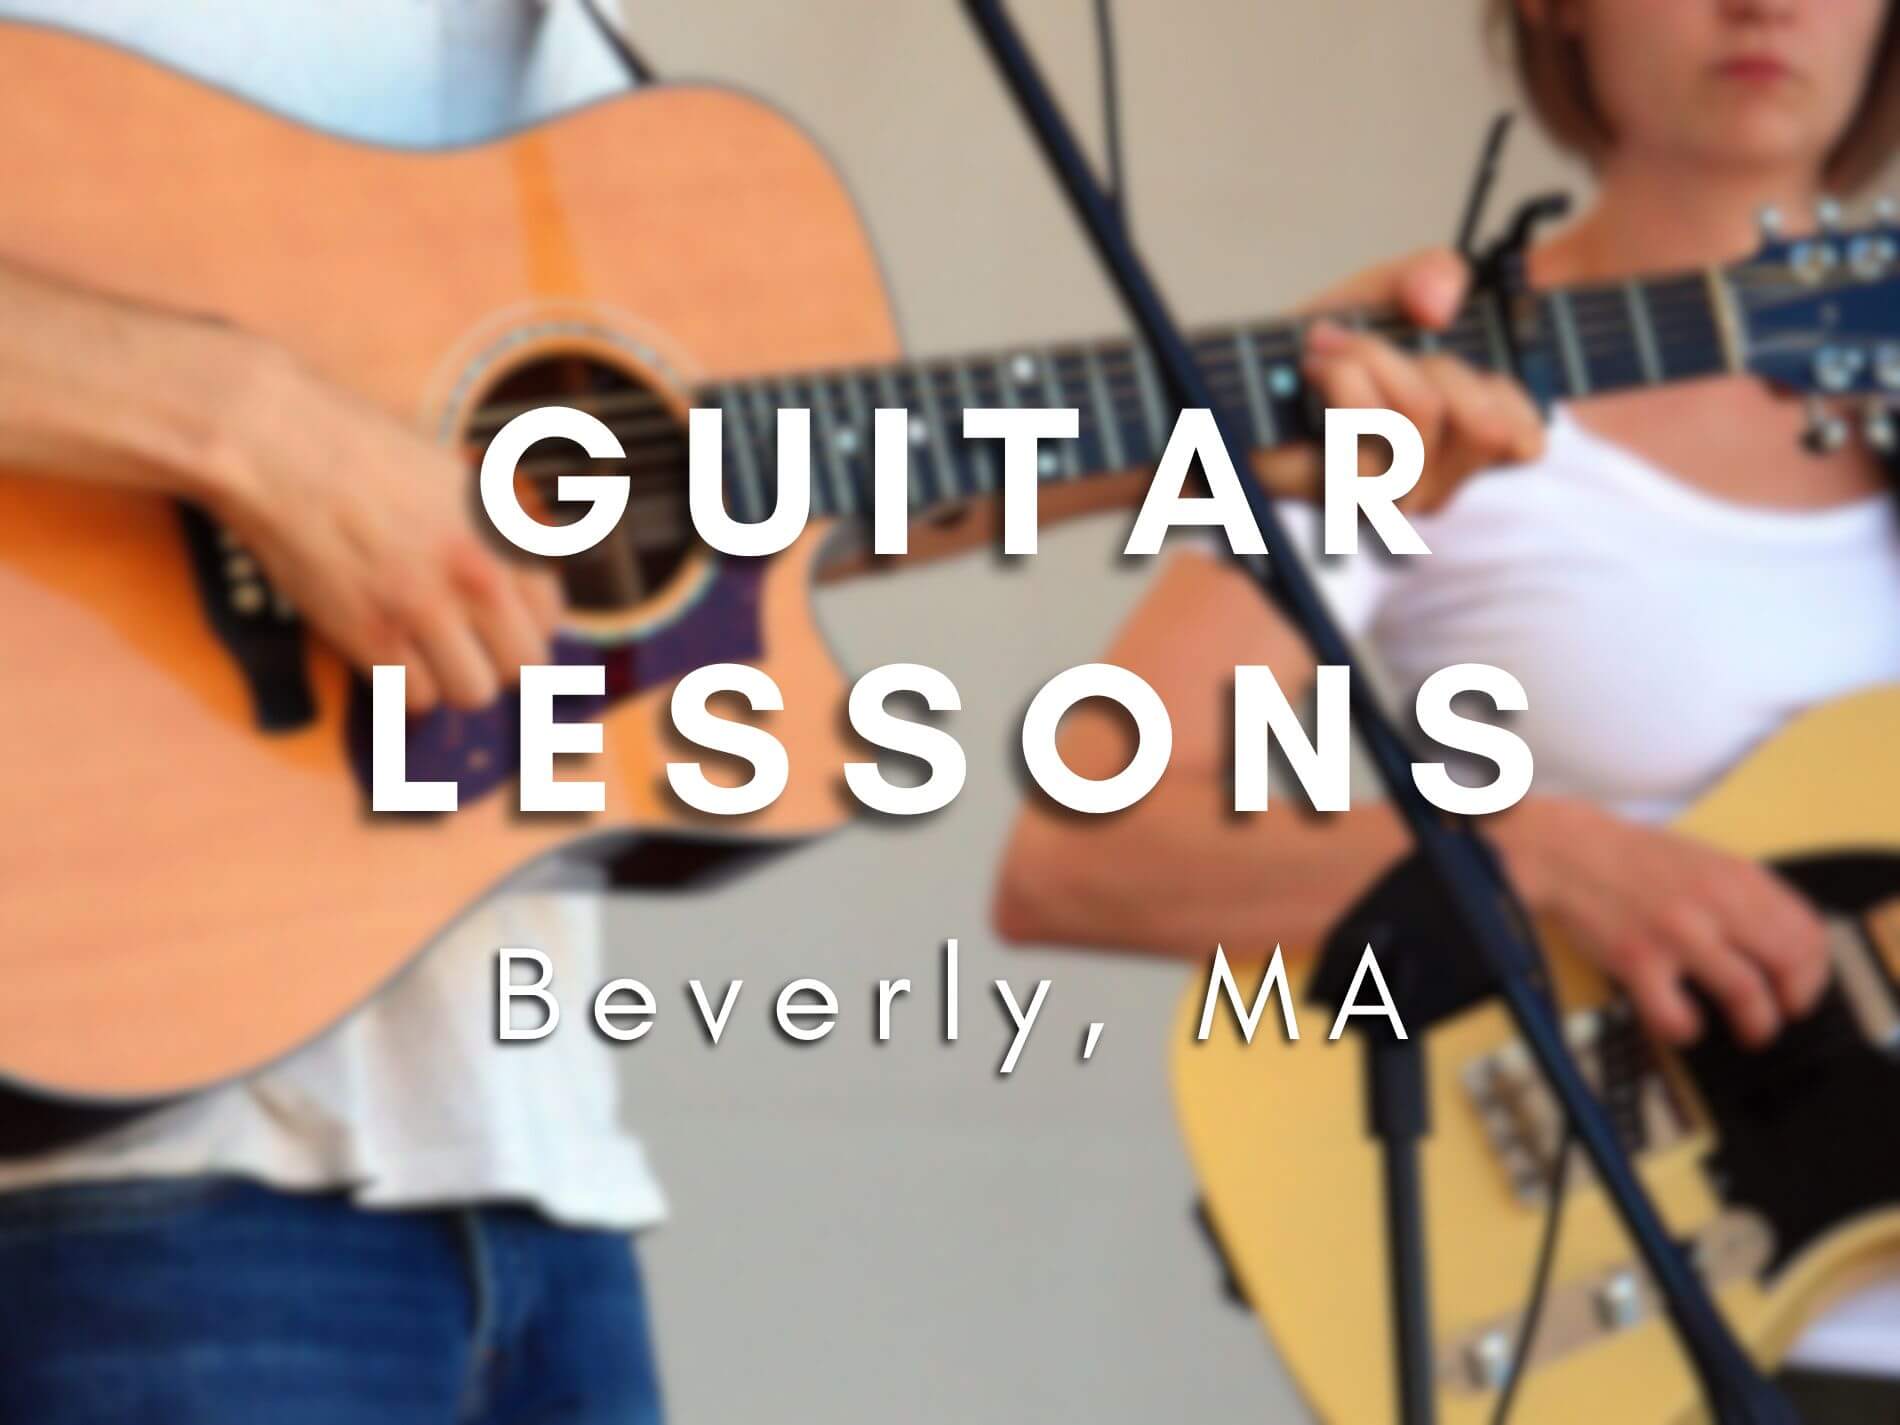 Guitar Lessons in Beverly, Massachusetts: Learn to Play Guitar with Expert Instruction